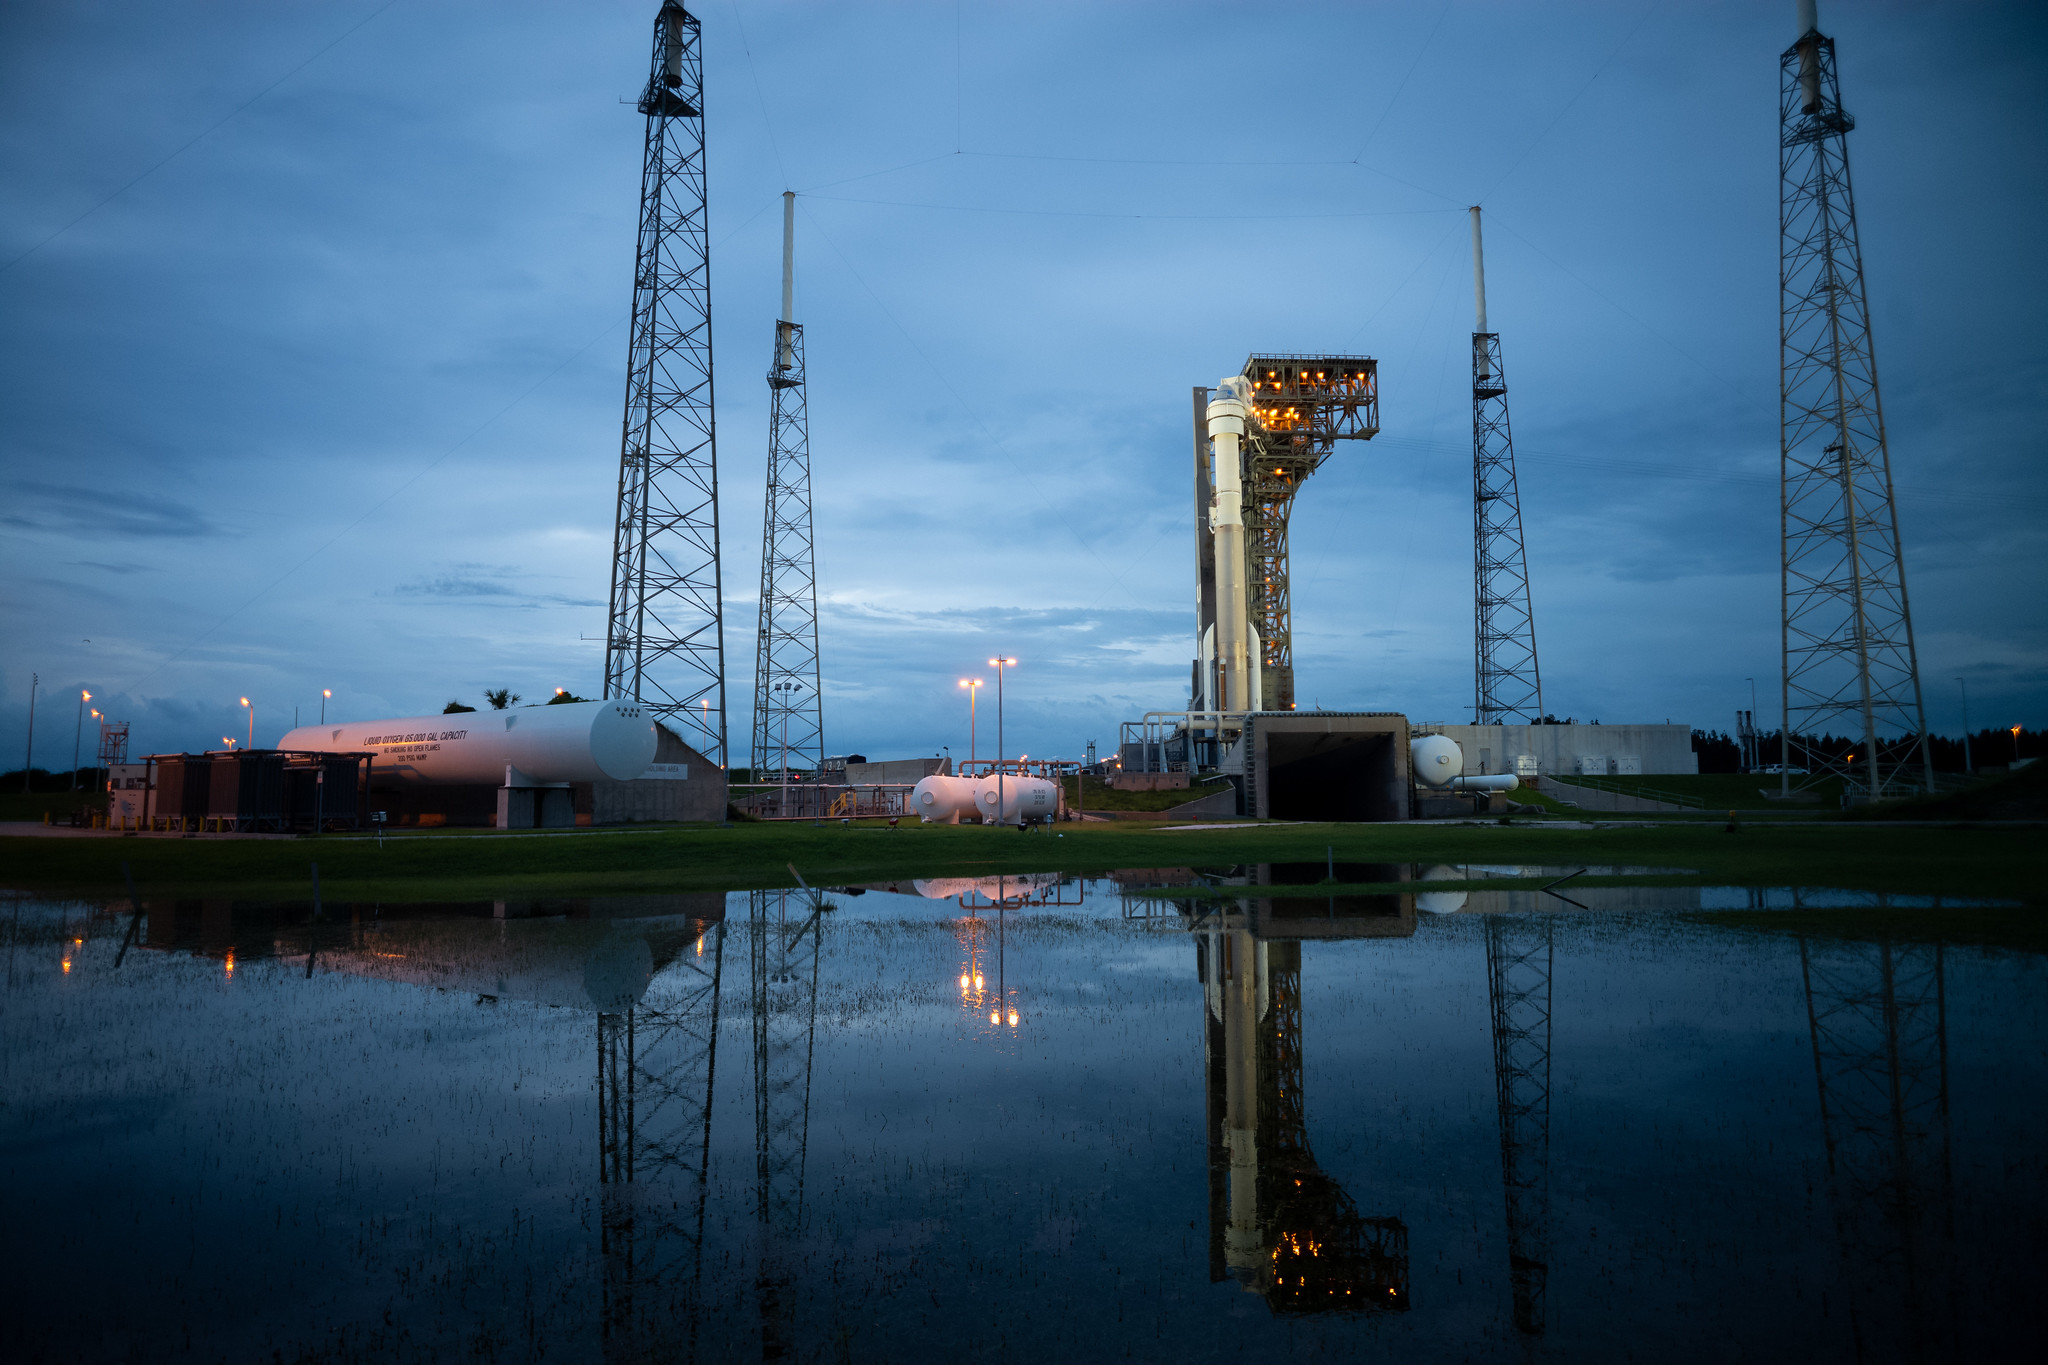 A United Launch Alliance Atlas V rocket with Boeing’s CST-100 Starliner spacecraft aboard is seen on the launch pad 